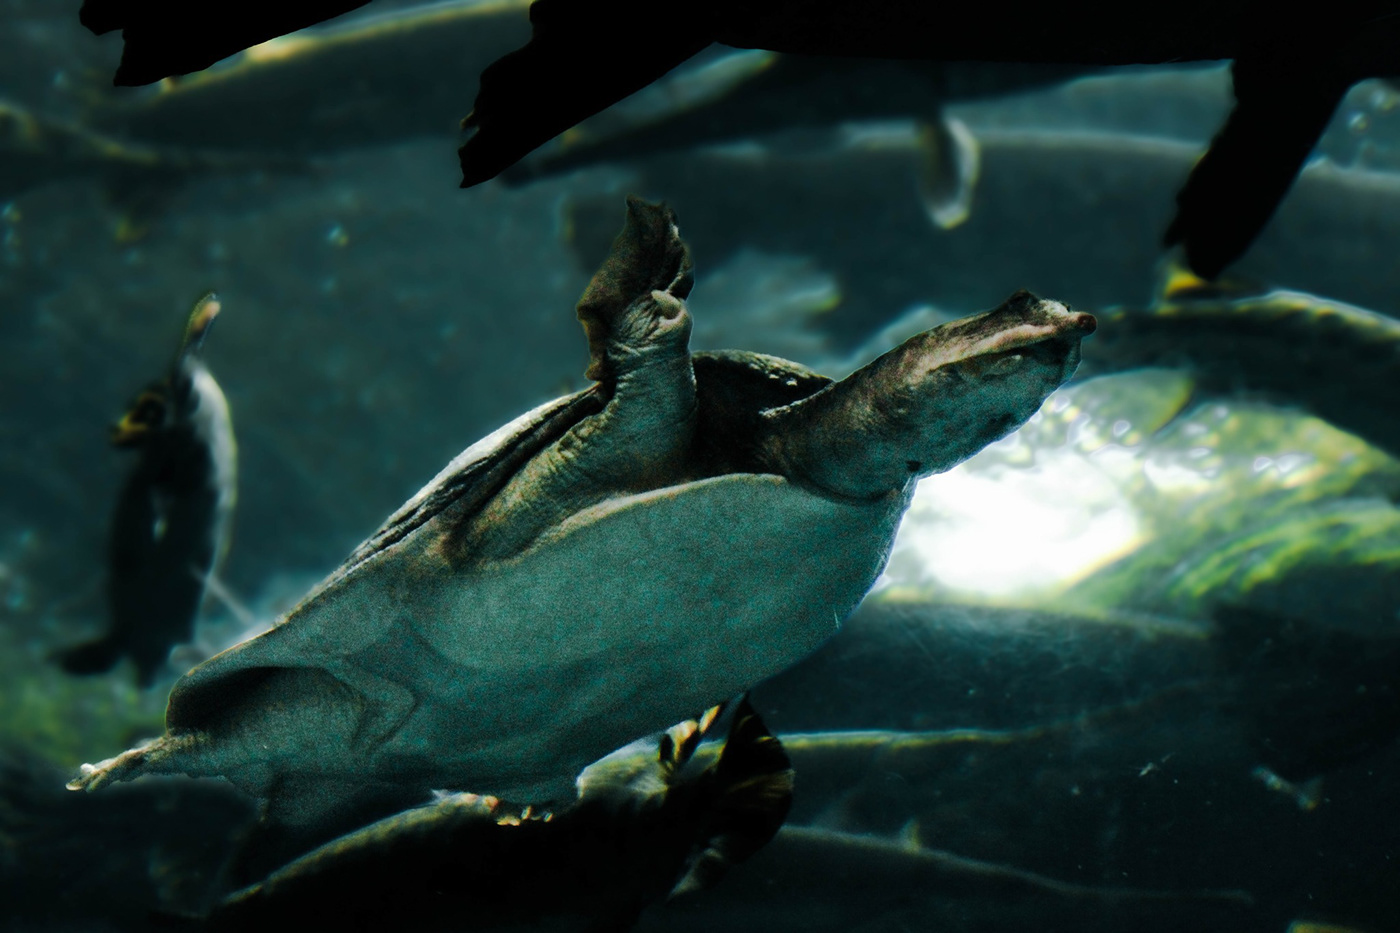 Turtle Nature nature photography Photography  Edited grunge Ocean sea UNDERWATER PHOTOGRAPHY softshell turtle